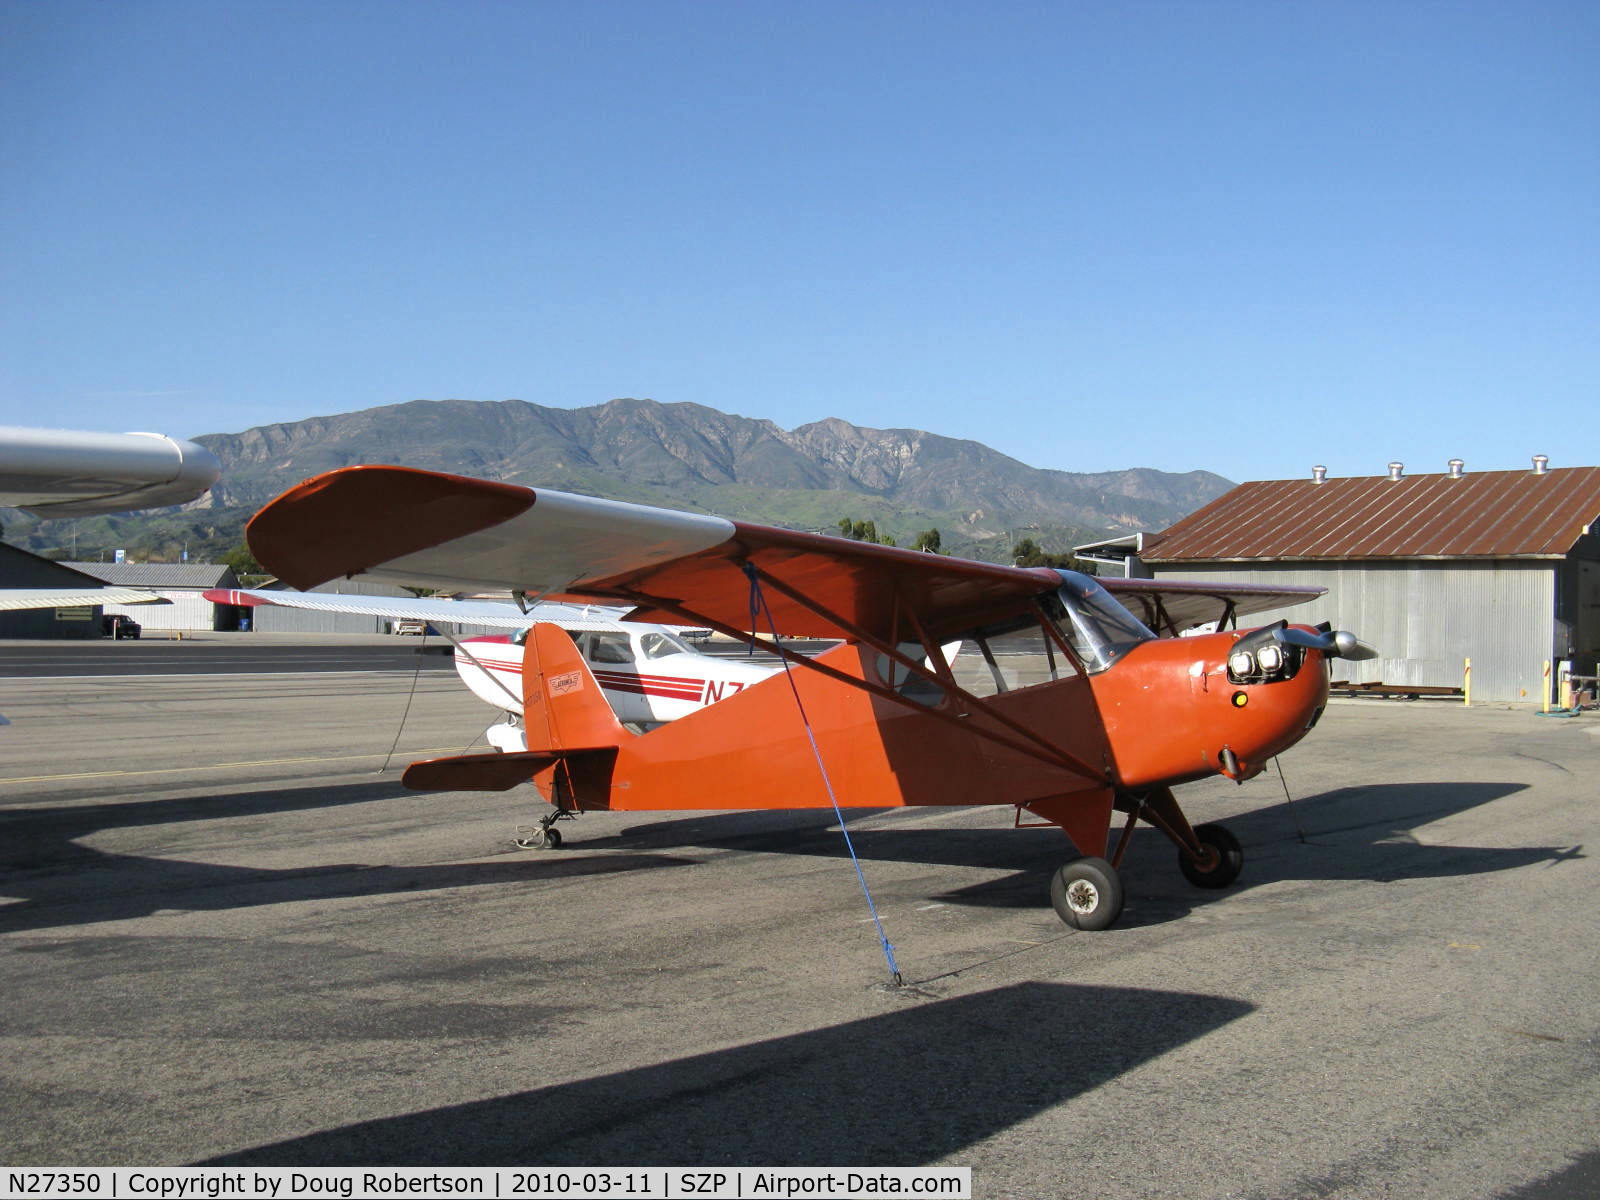 N27350, 1940 Aeronca 60-TF C/N 1630T, 1940 Aeronca 60-TF DEFENDER, Franklin 4AC150-A 60 Hp, quite rare model now, tandem seating trainer, nearly identical to Army O-58/L-3.